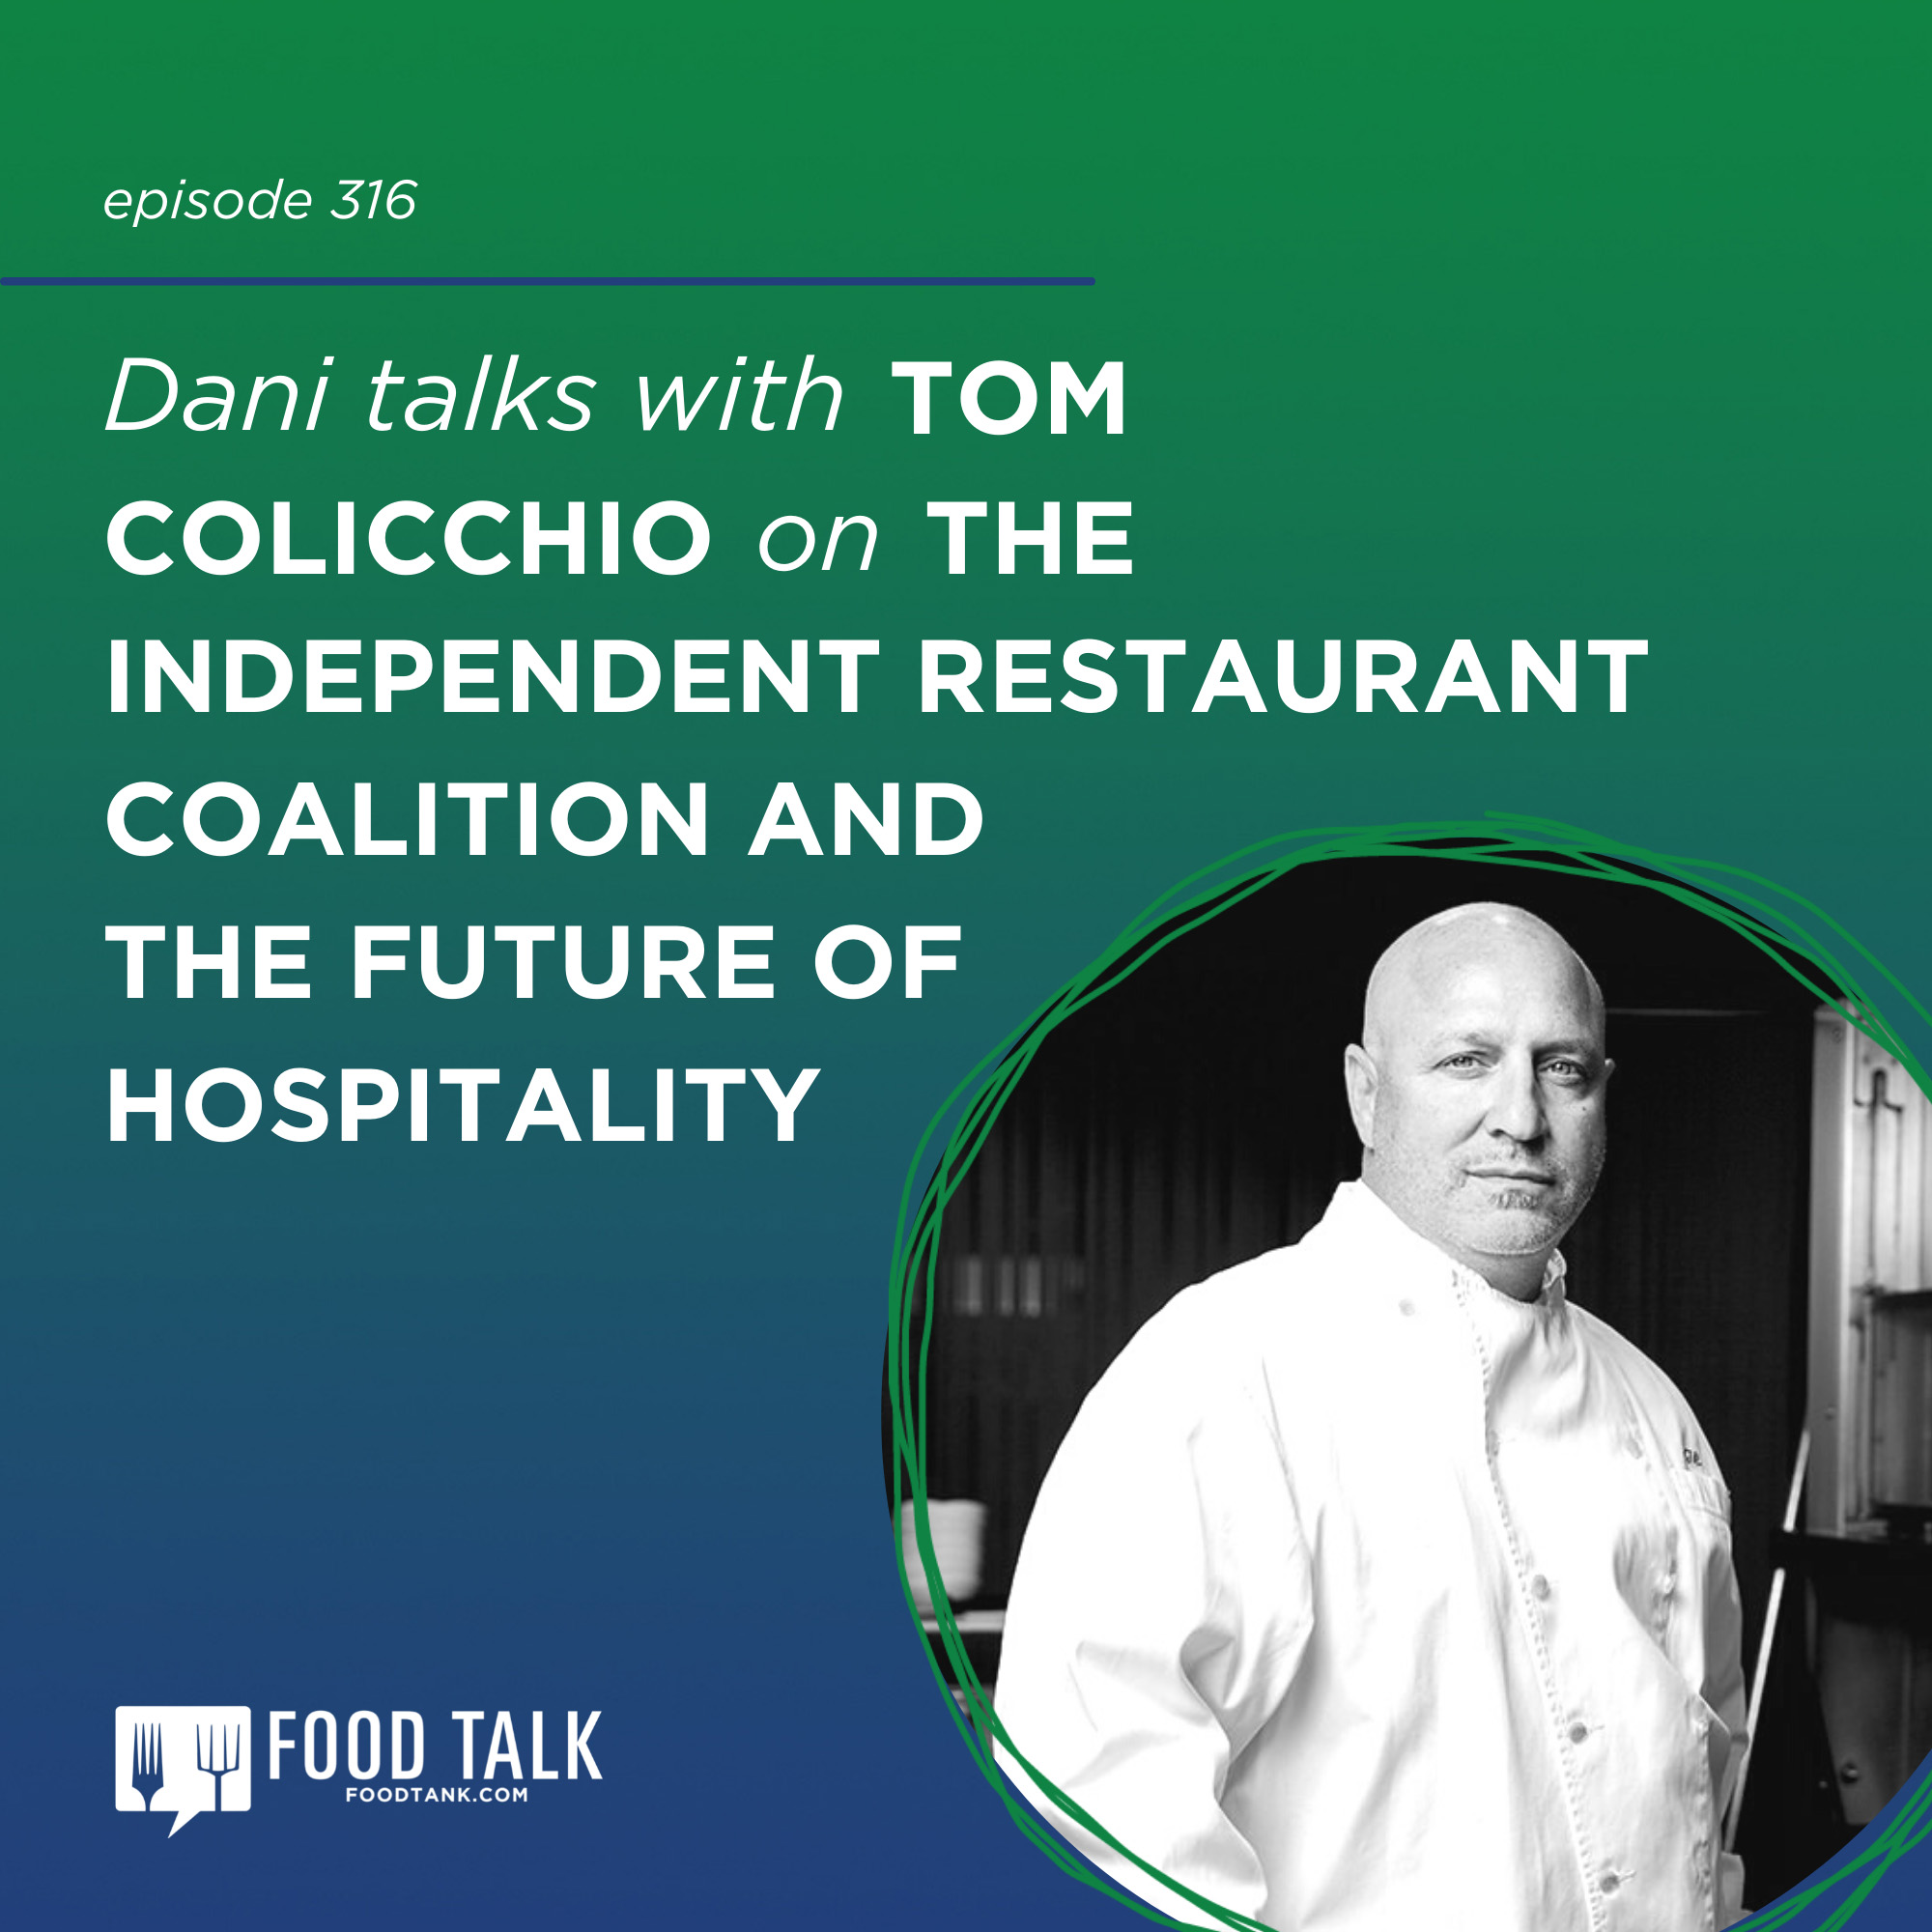 https://podcasts.apple.com/us/podcast/316-tom-colicchio-on-the-independent-restaurant/id1434128568?i=1000556501842